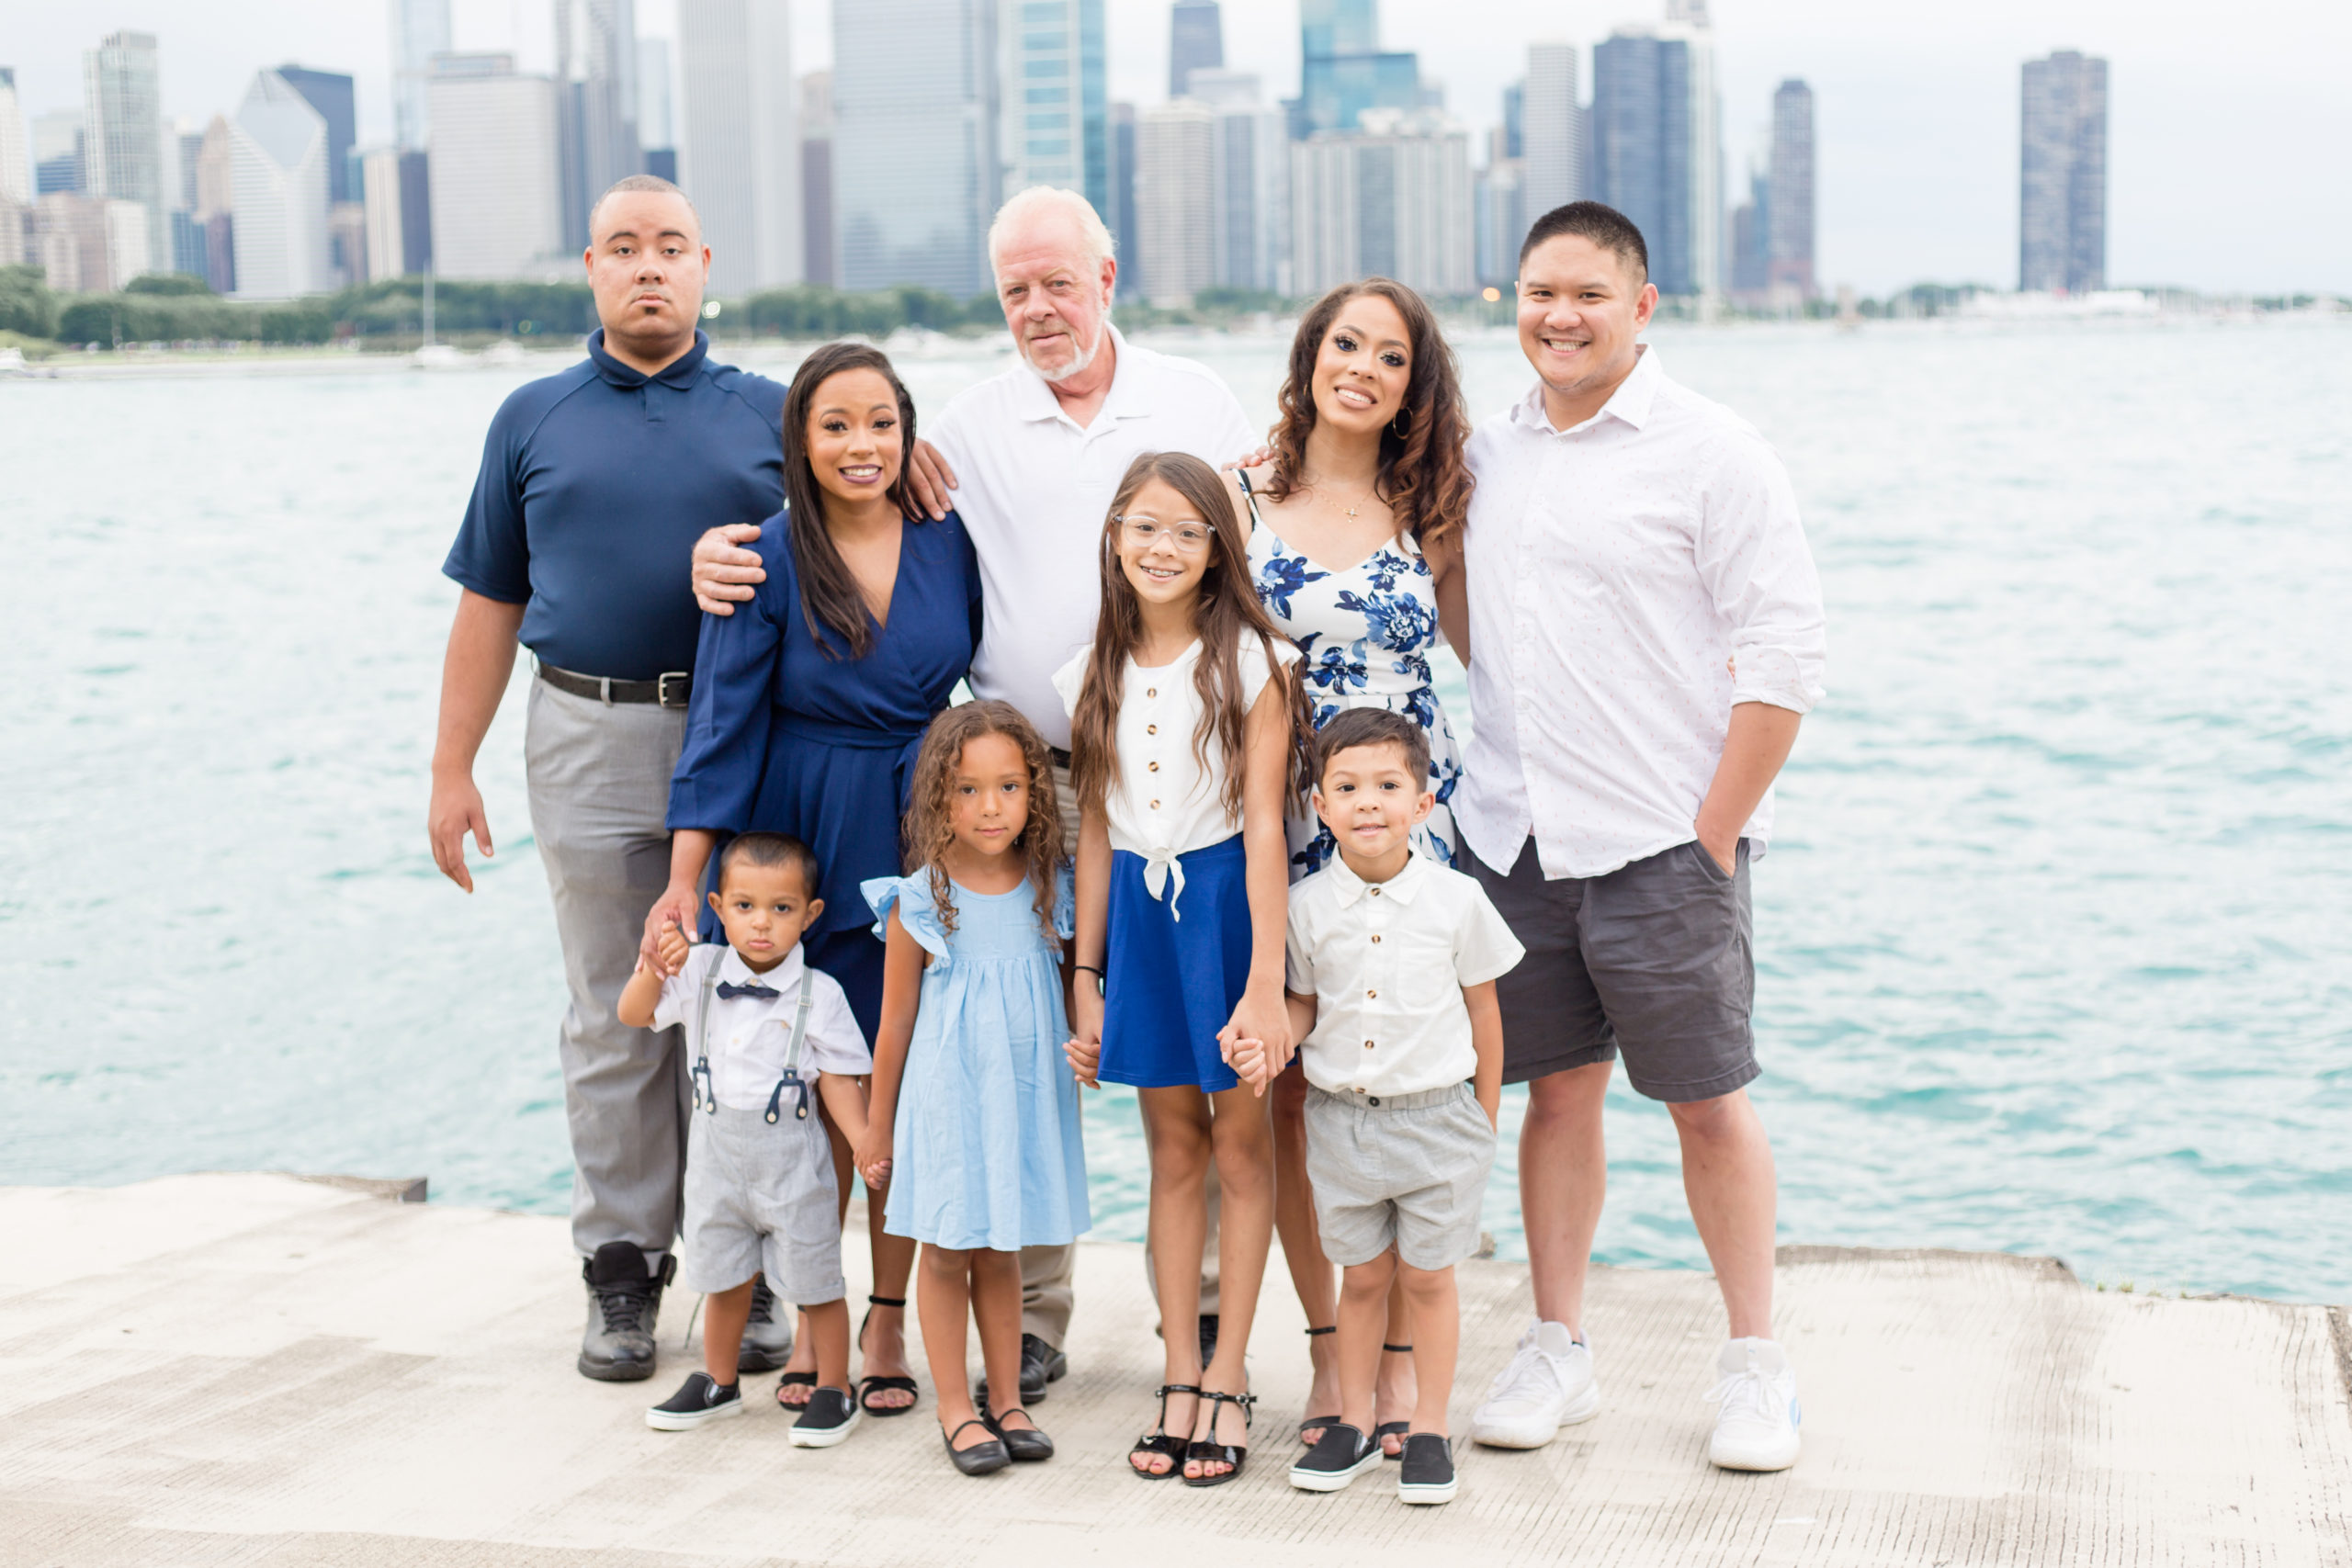 Check out the blog for this Extended Family Session in Downtown Chicago. Beautiful family of 9 standing with downtown Chicago in the background. This family is dressed in a variety of shades of blue and white. 